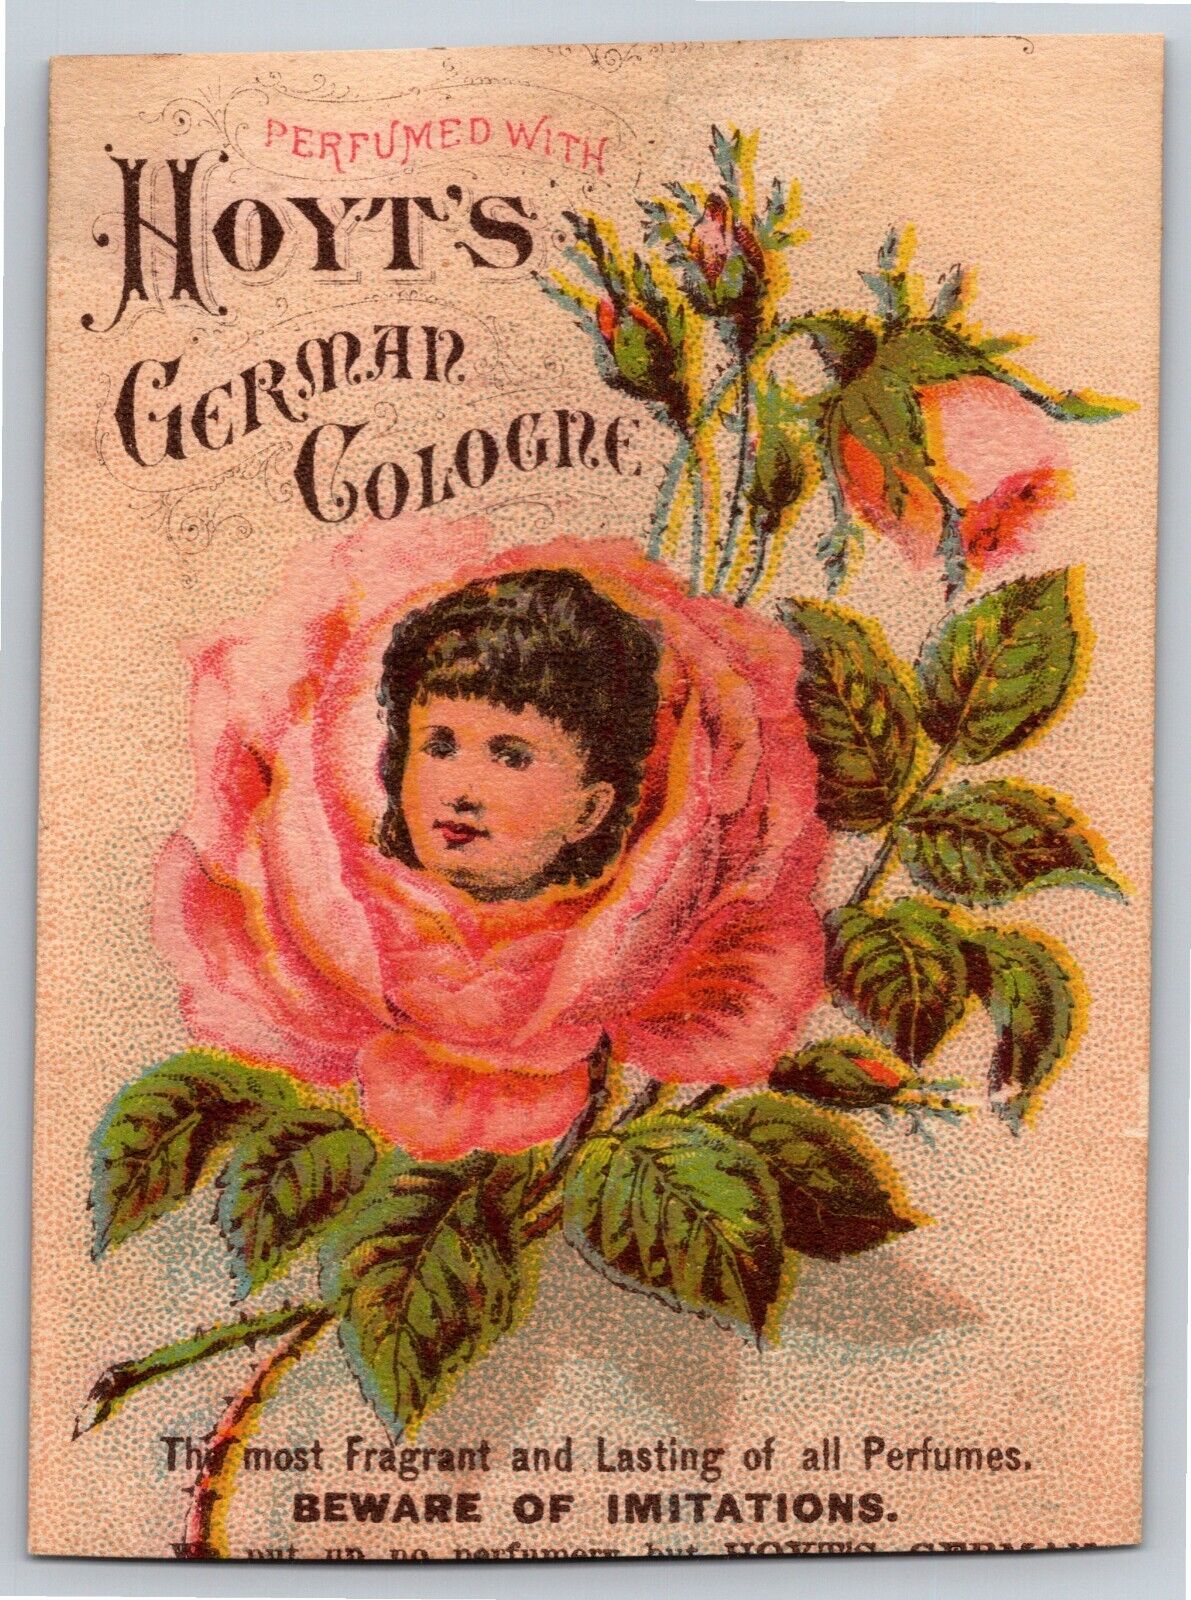 Hoyt's German Cologne Victorian Trade Cardgirl's Face At Center Of Rose Trimmed